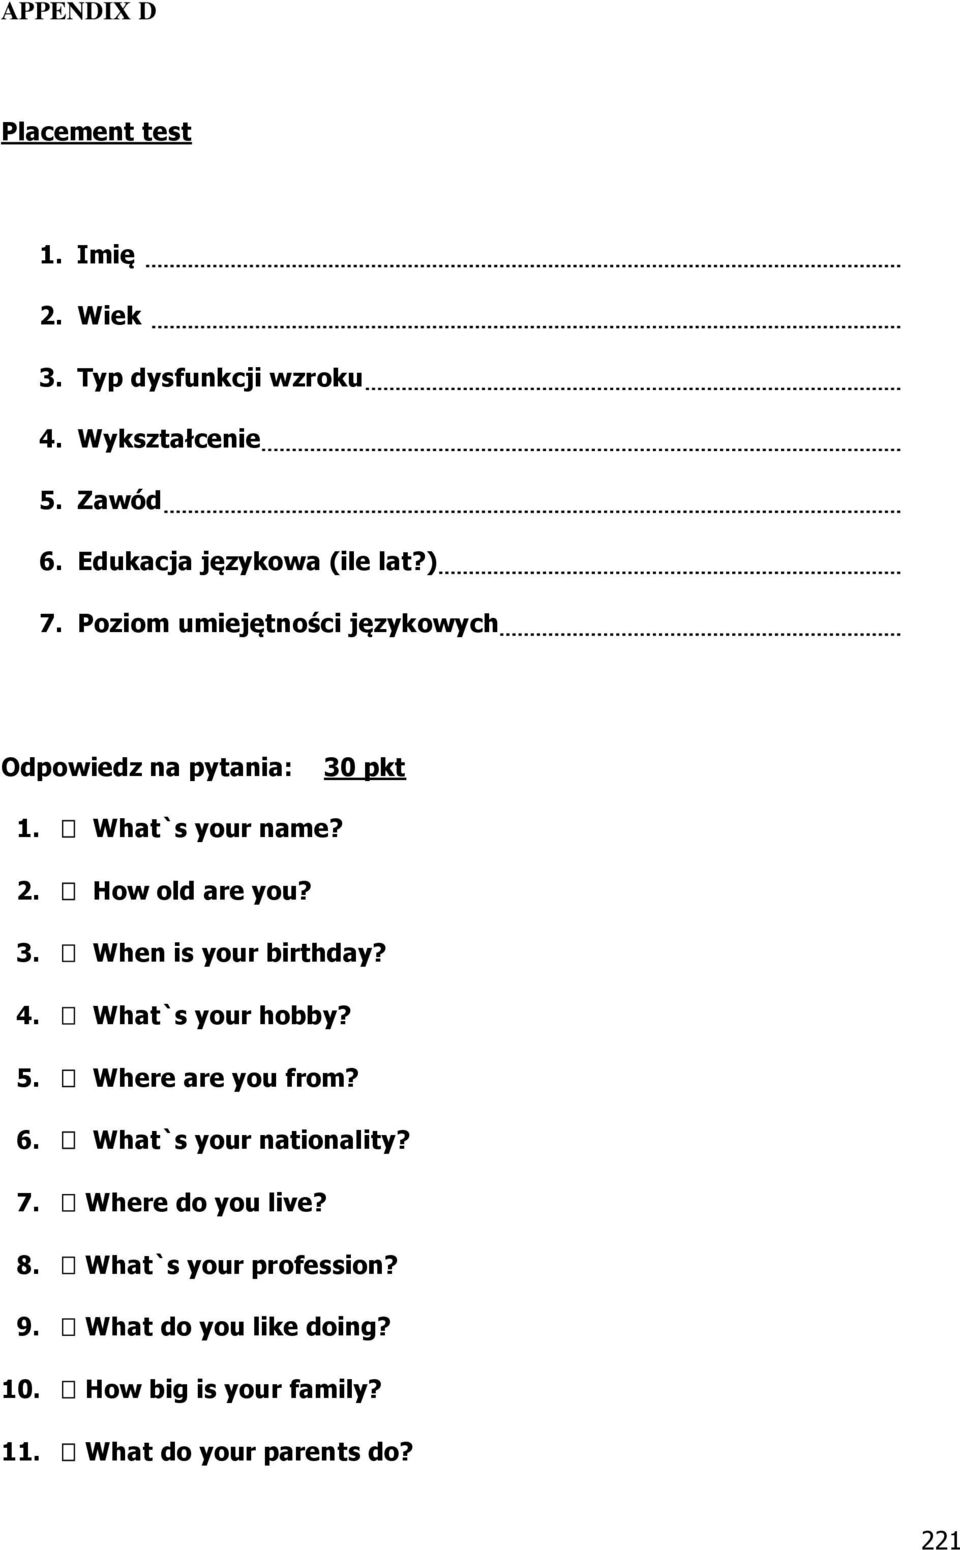 How old are you? 3. When is your birthday? 4. What`s your hobby? 5. Where are you from? 6. What`s your nationality?